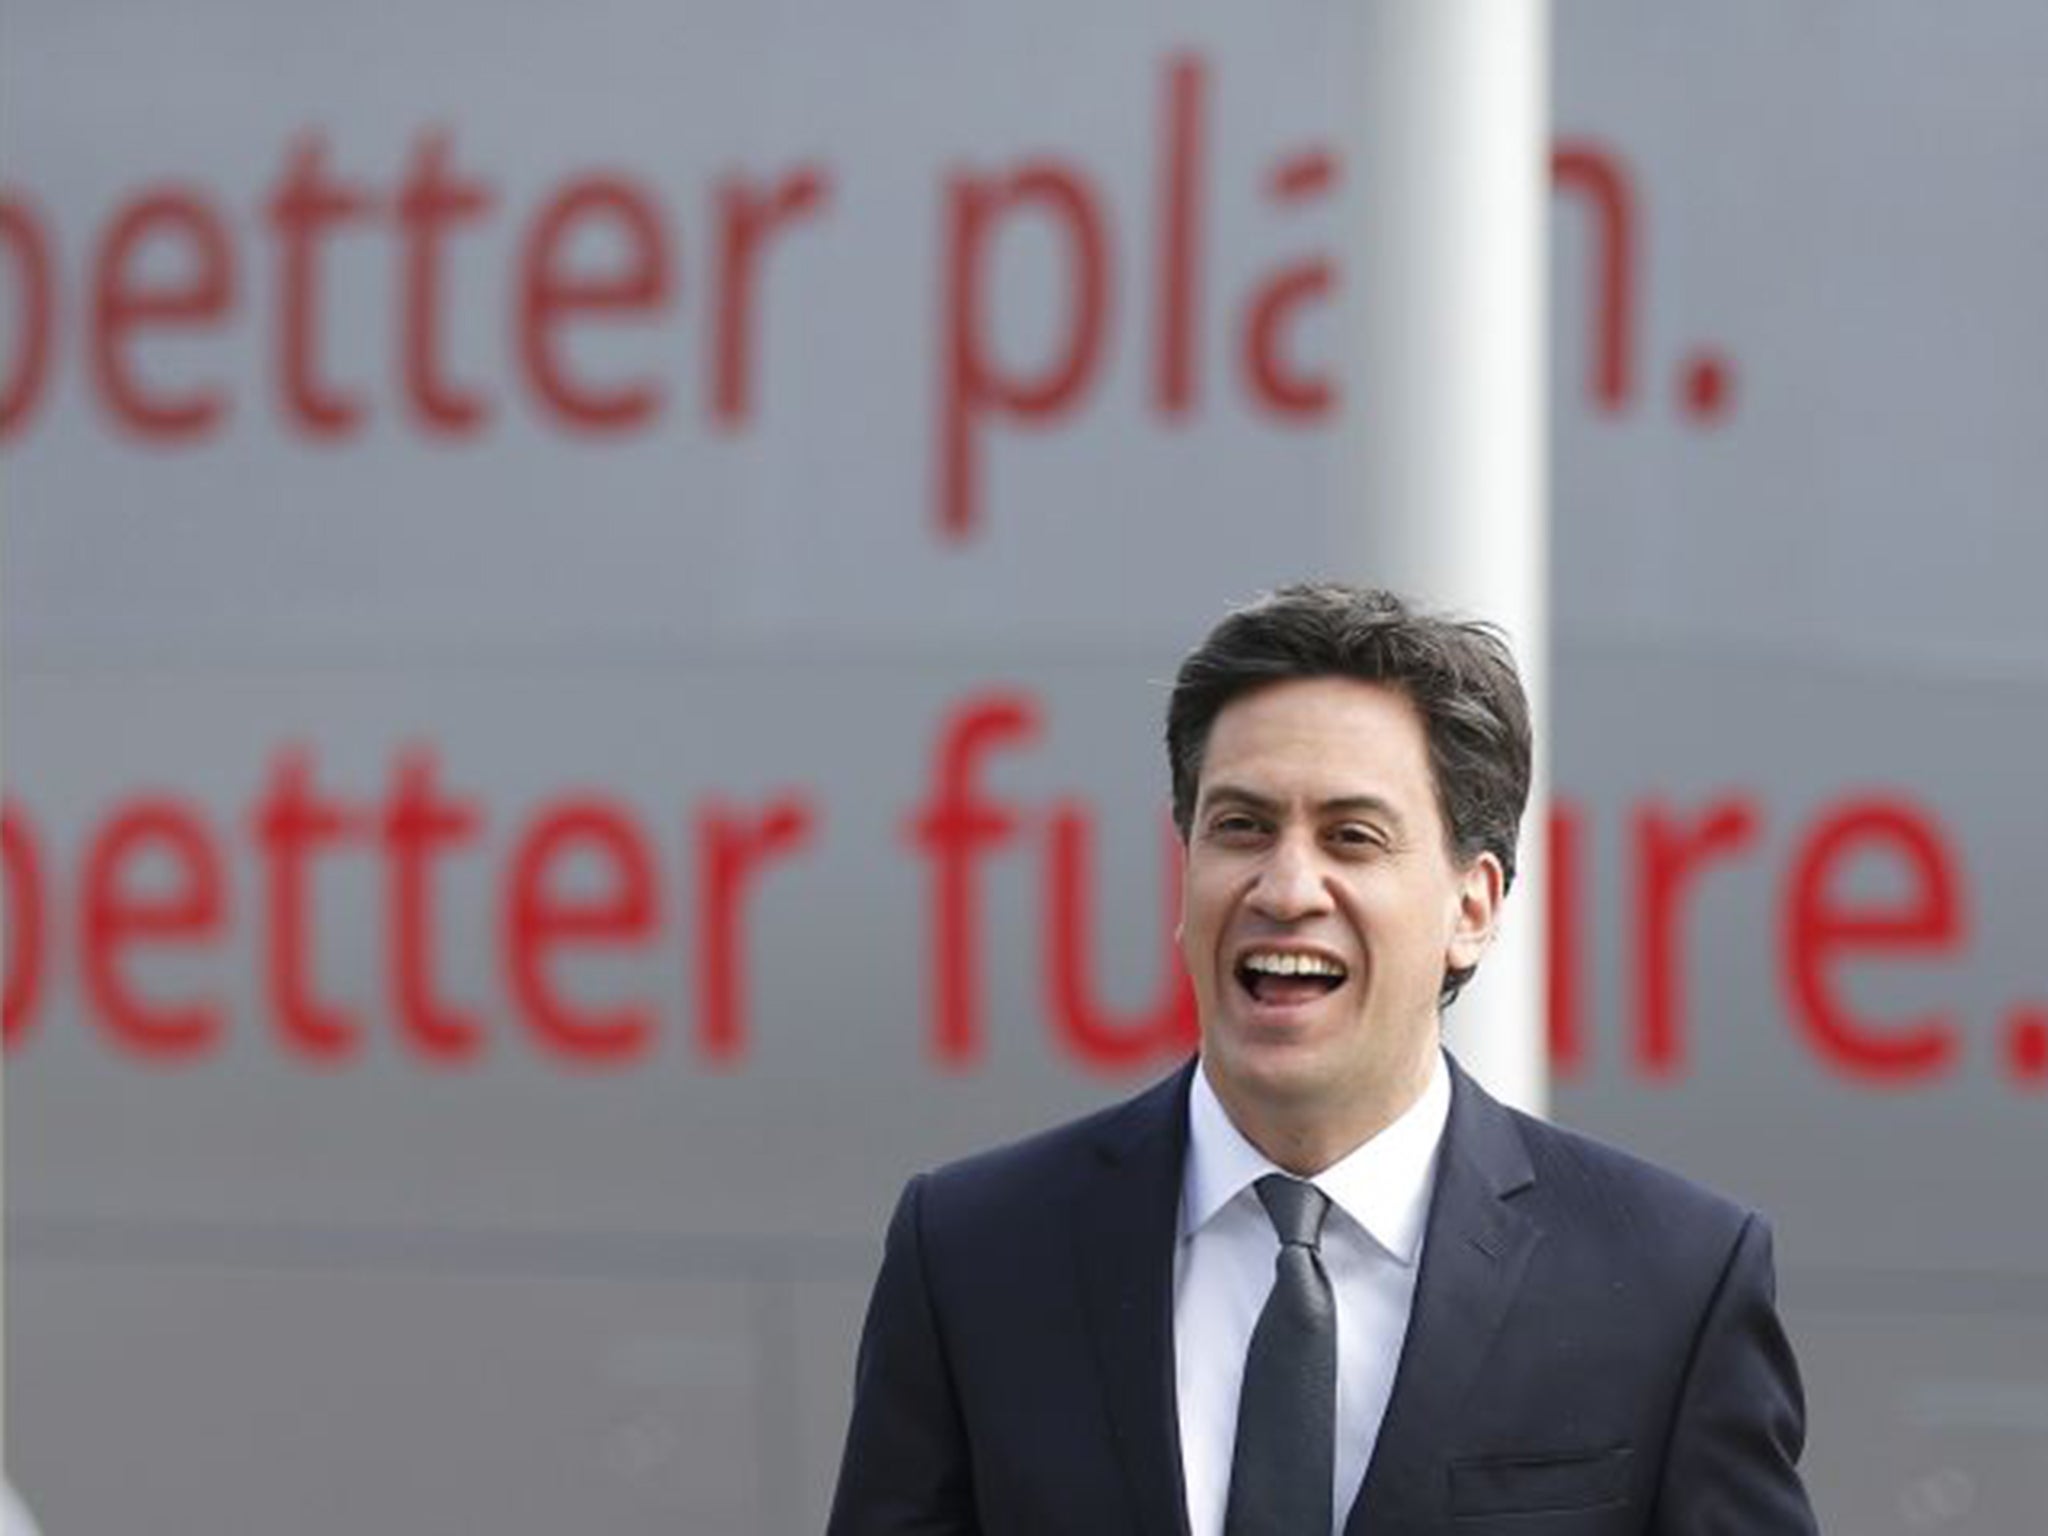 Ed Miliband at an election campaign event in Bristol on Tuesday. He will say the non-dom rules ‘hold Britain back’ (Reuters)